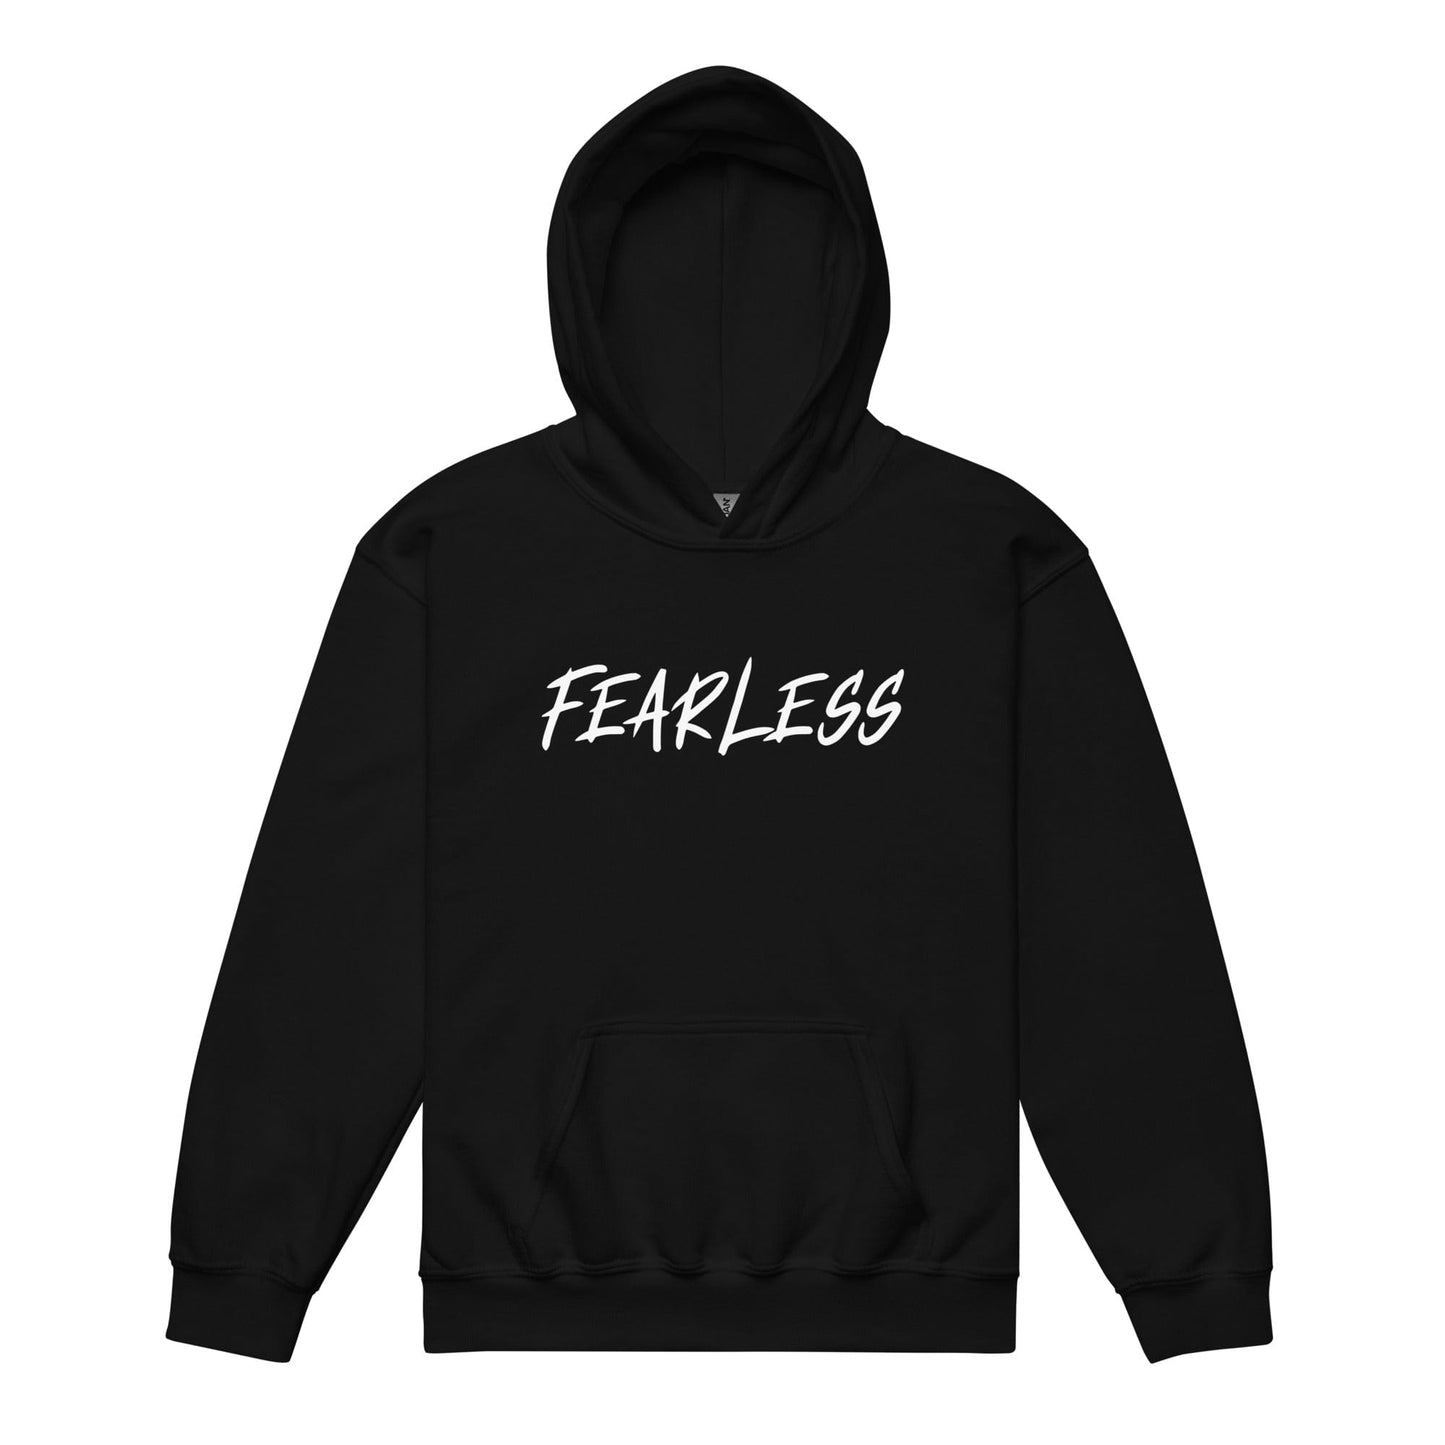 Fearless - Youth Hoodie